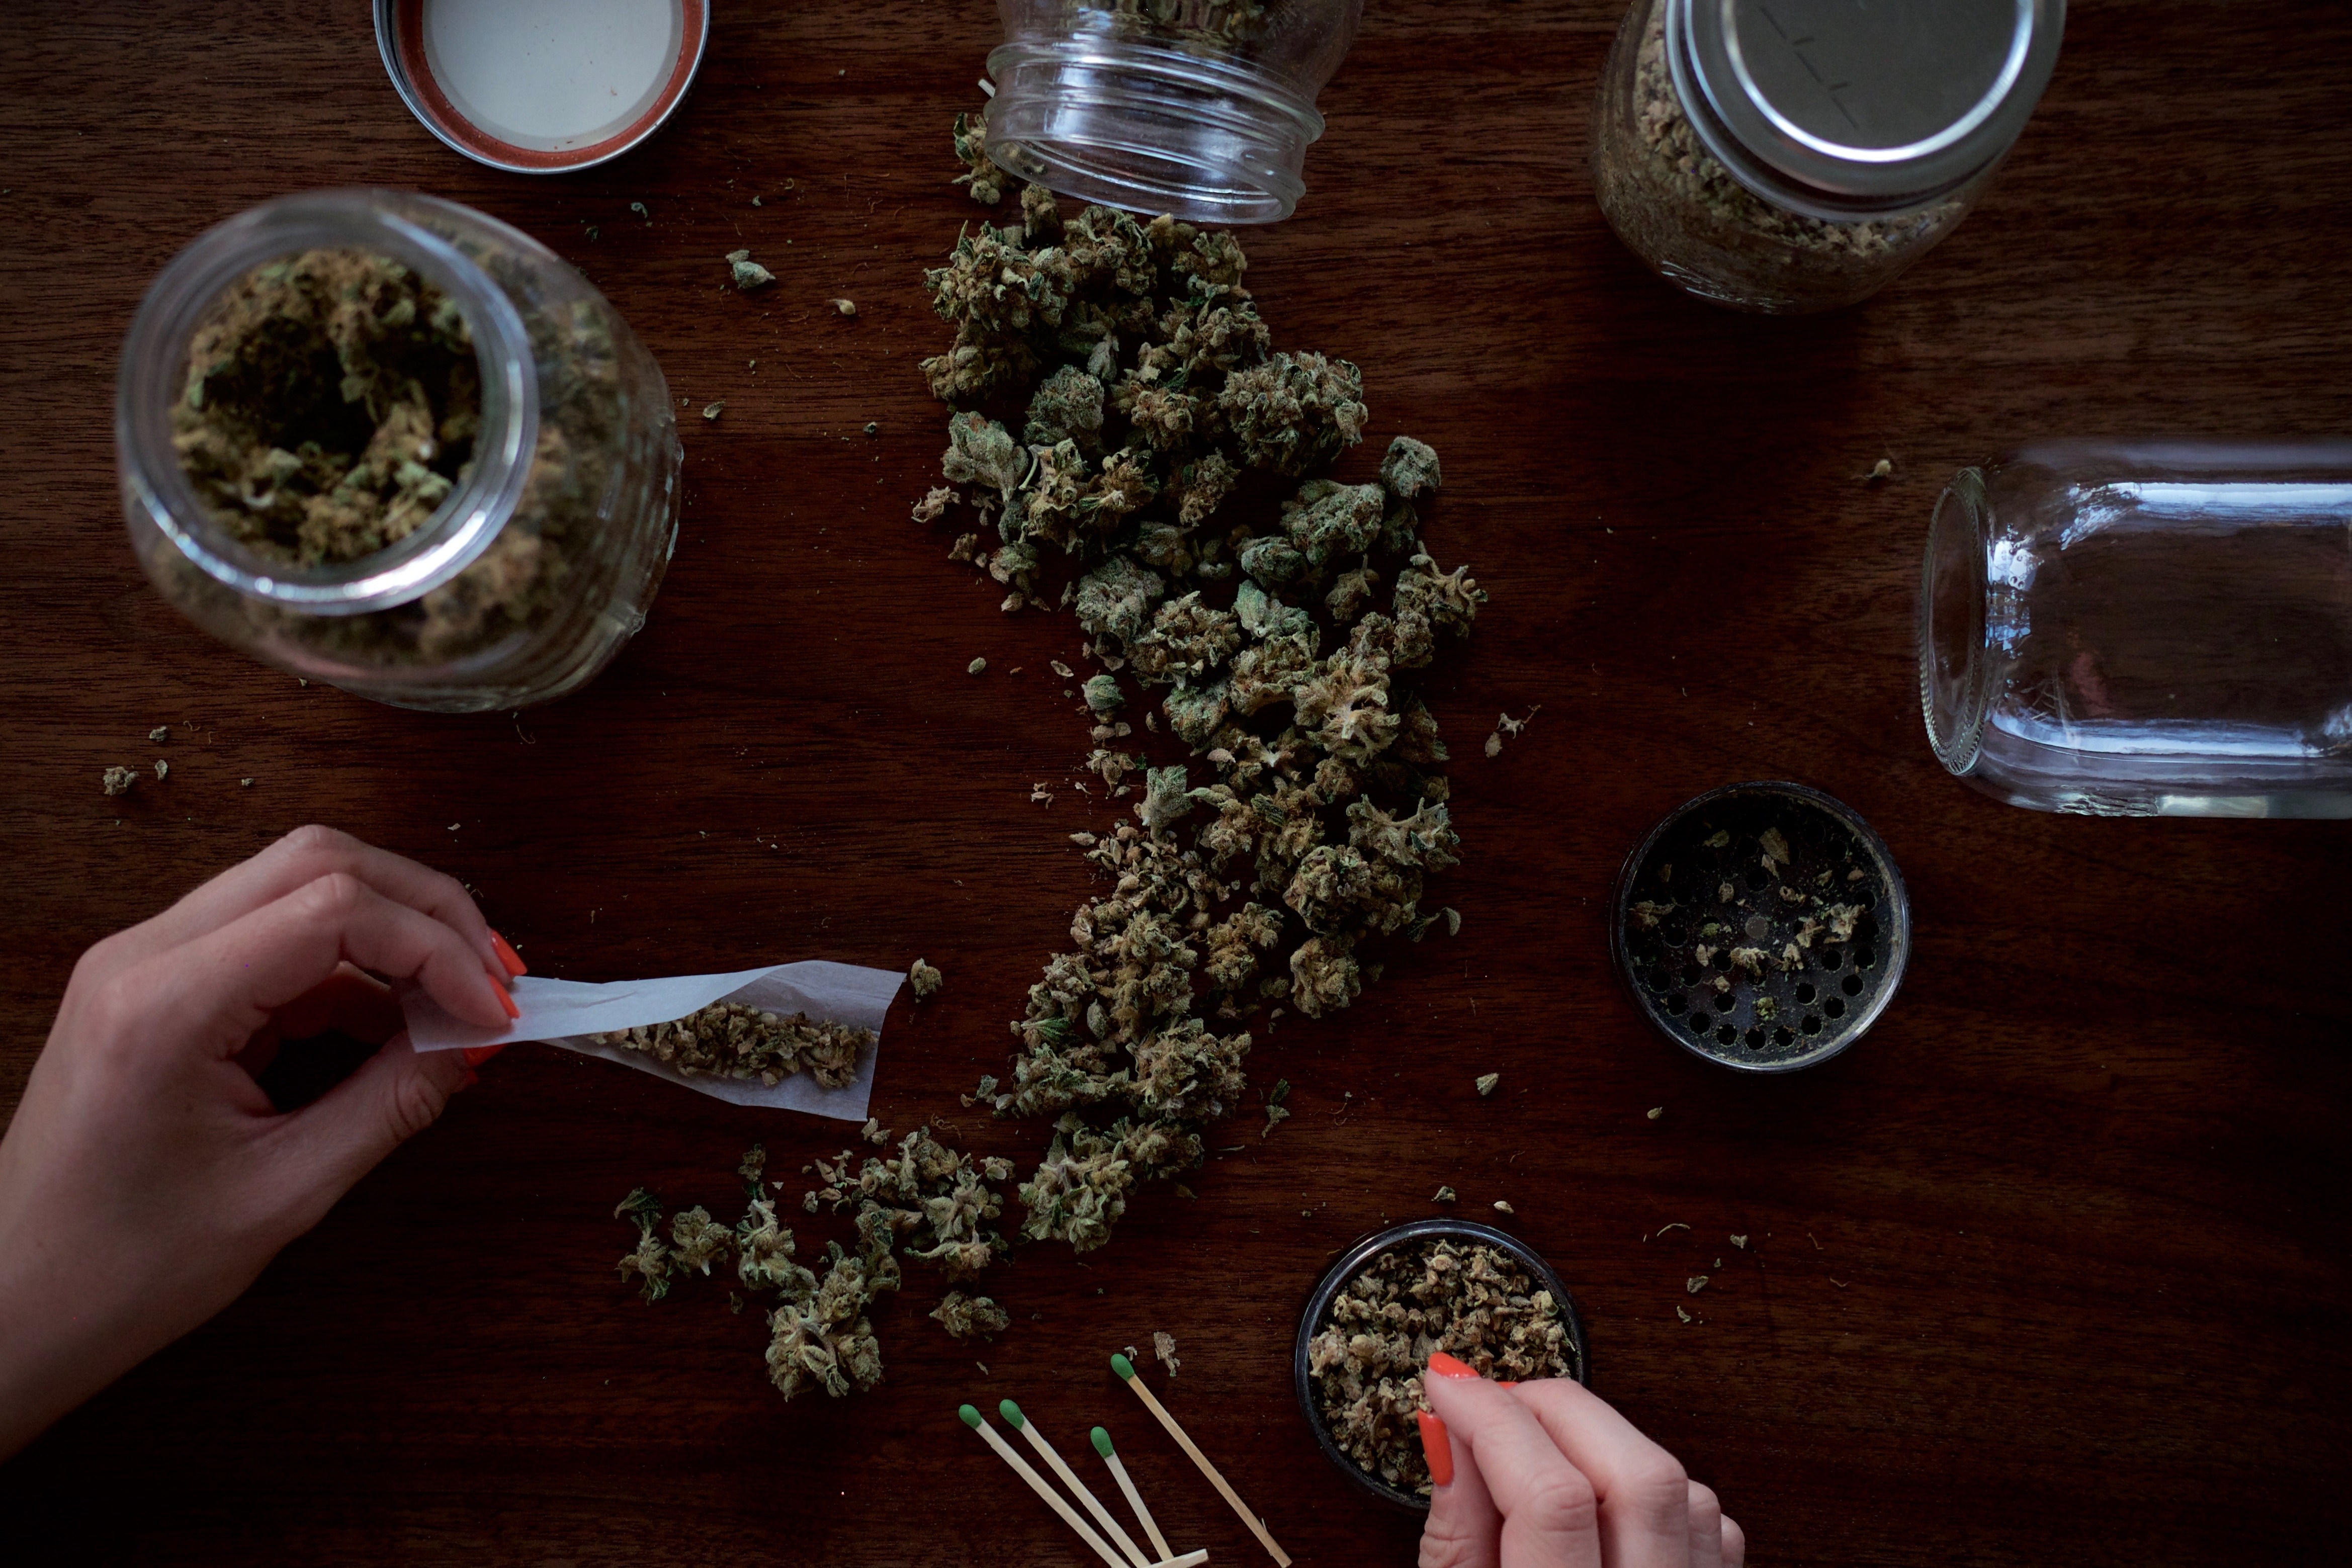 human hands above table with spilled cannabis jar, rolling joints with papers